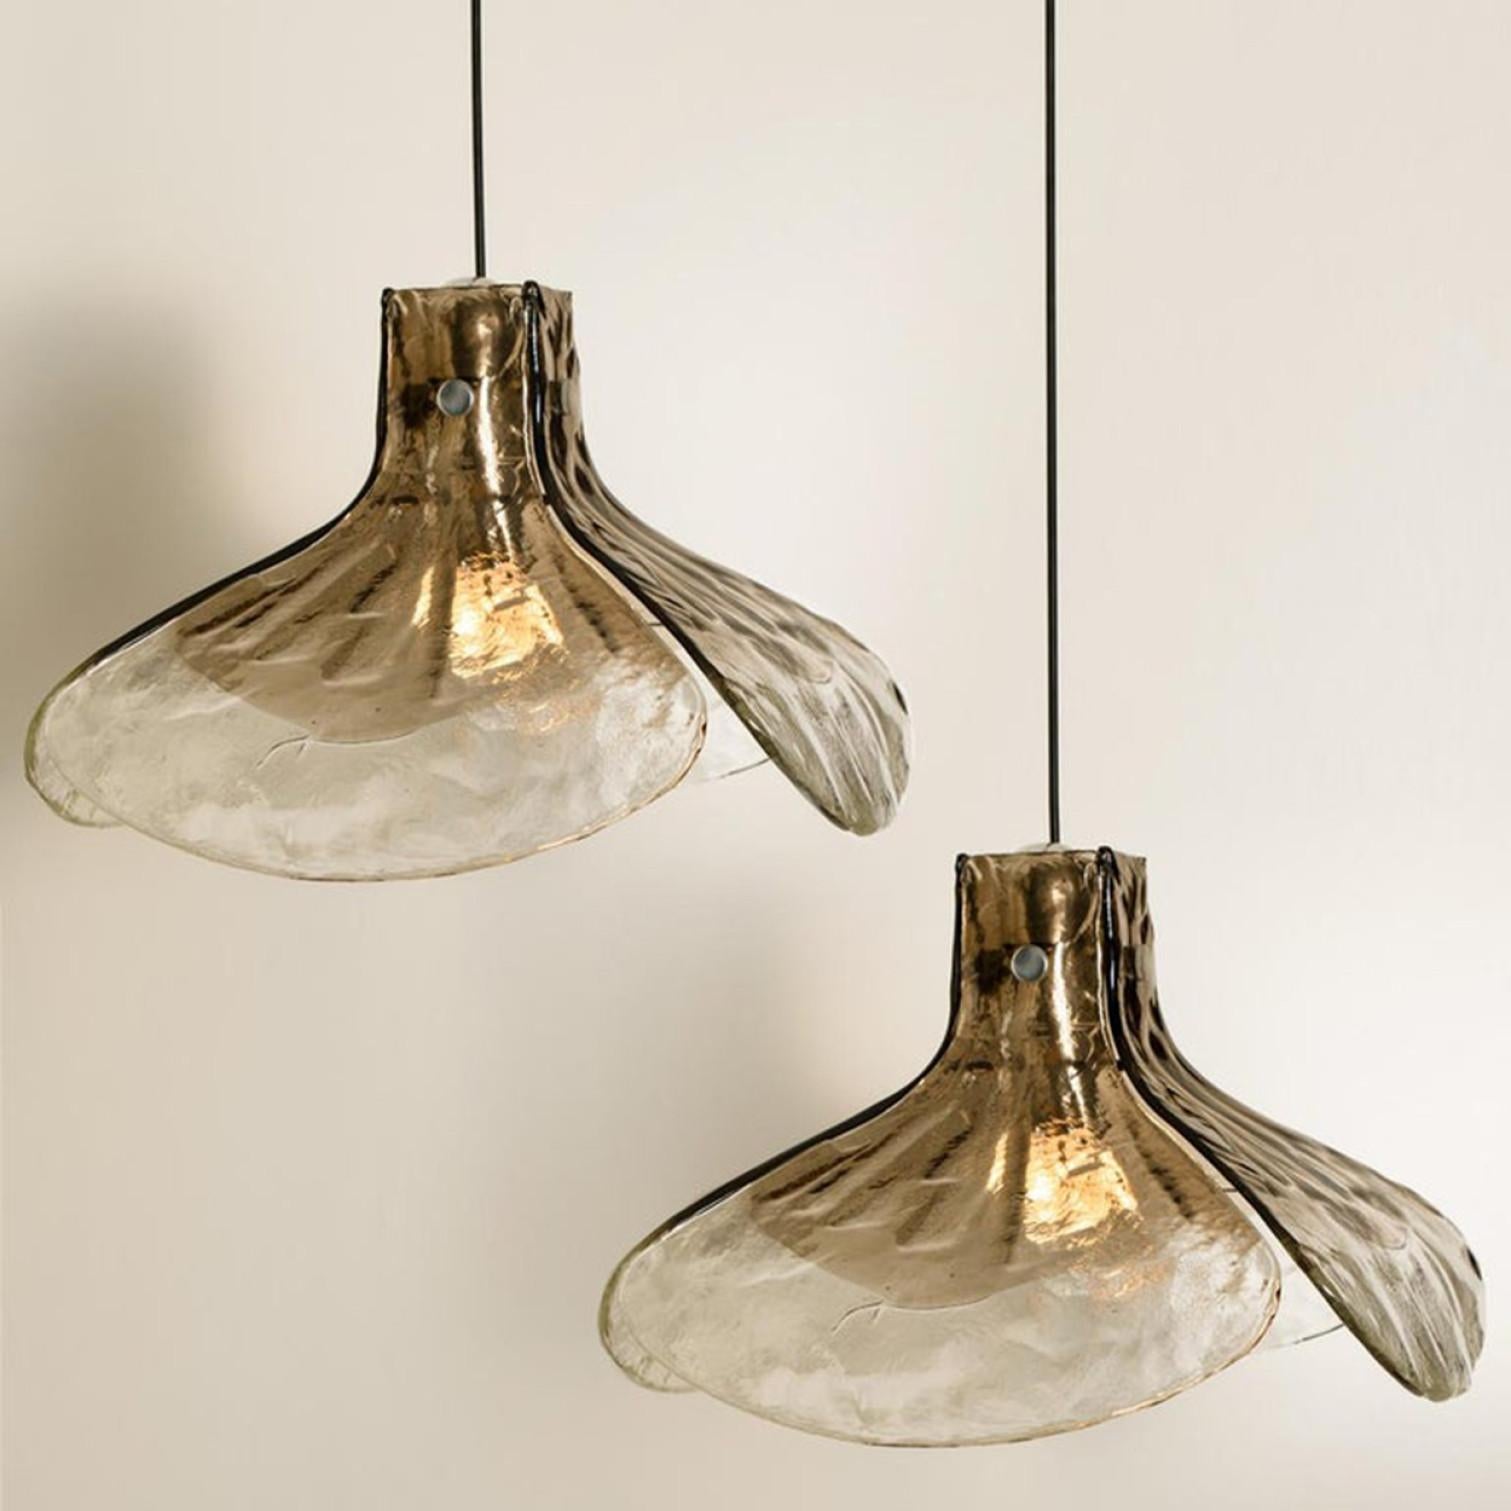 1 of the 2 pendant lamps, model LS185 by Carlo Nason for Mazzega.
Four crystal clear and smoked brown leaves compose this beautiful handmade piece of thick Murano glass.

Measures: H 16.93” (43 cm), D 23.62